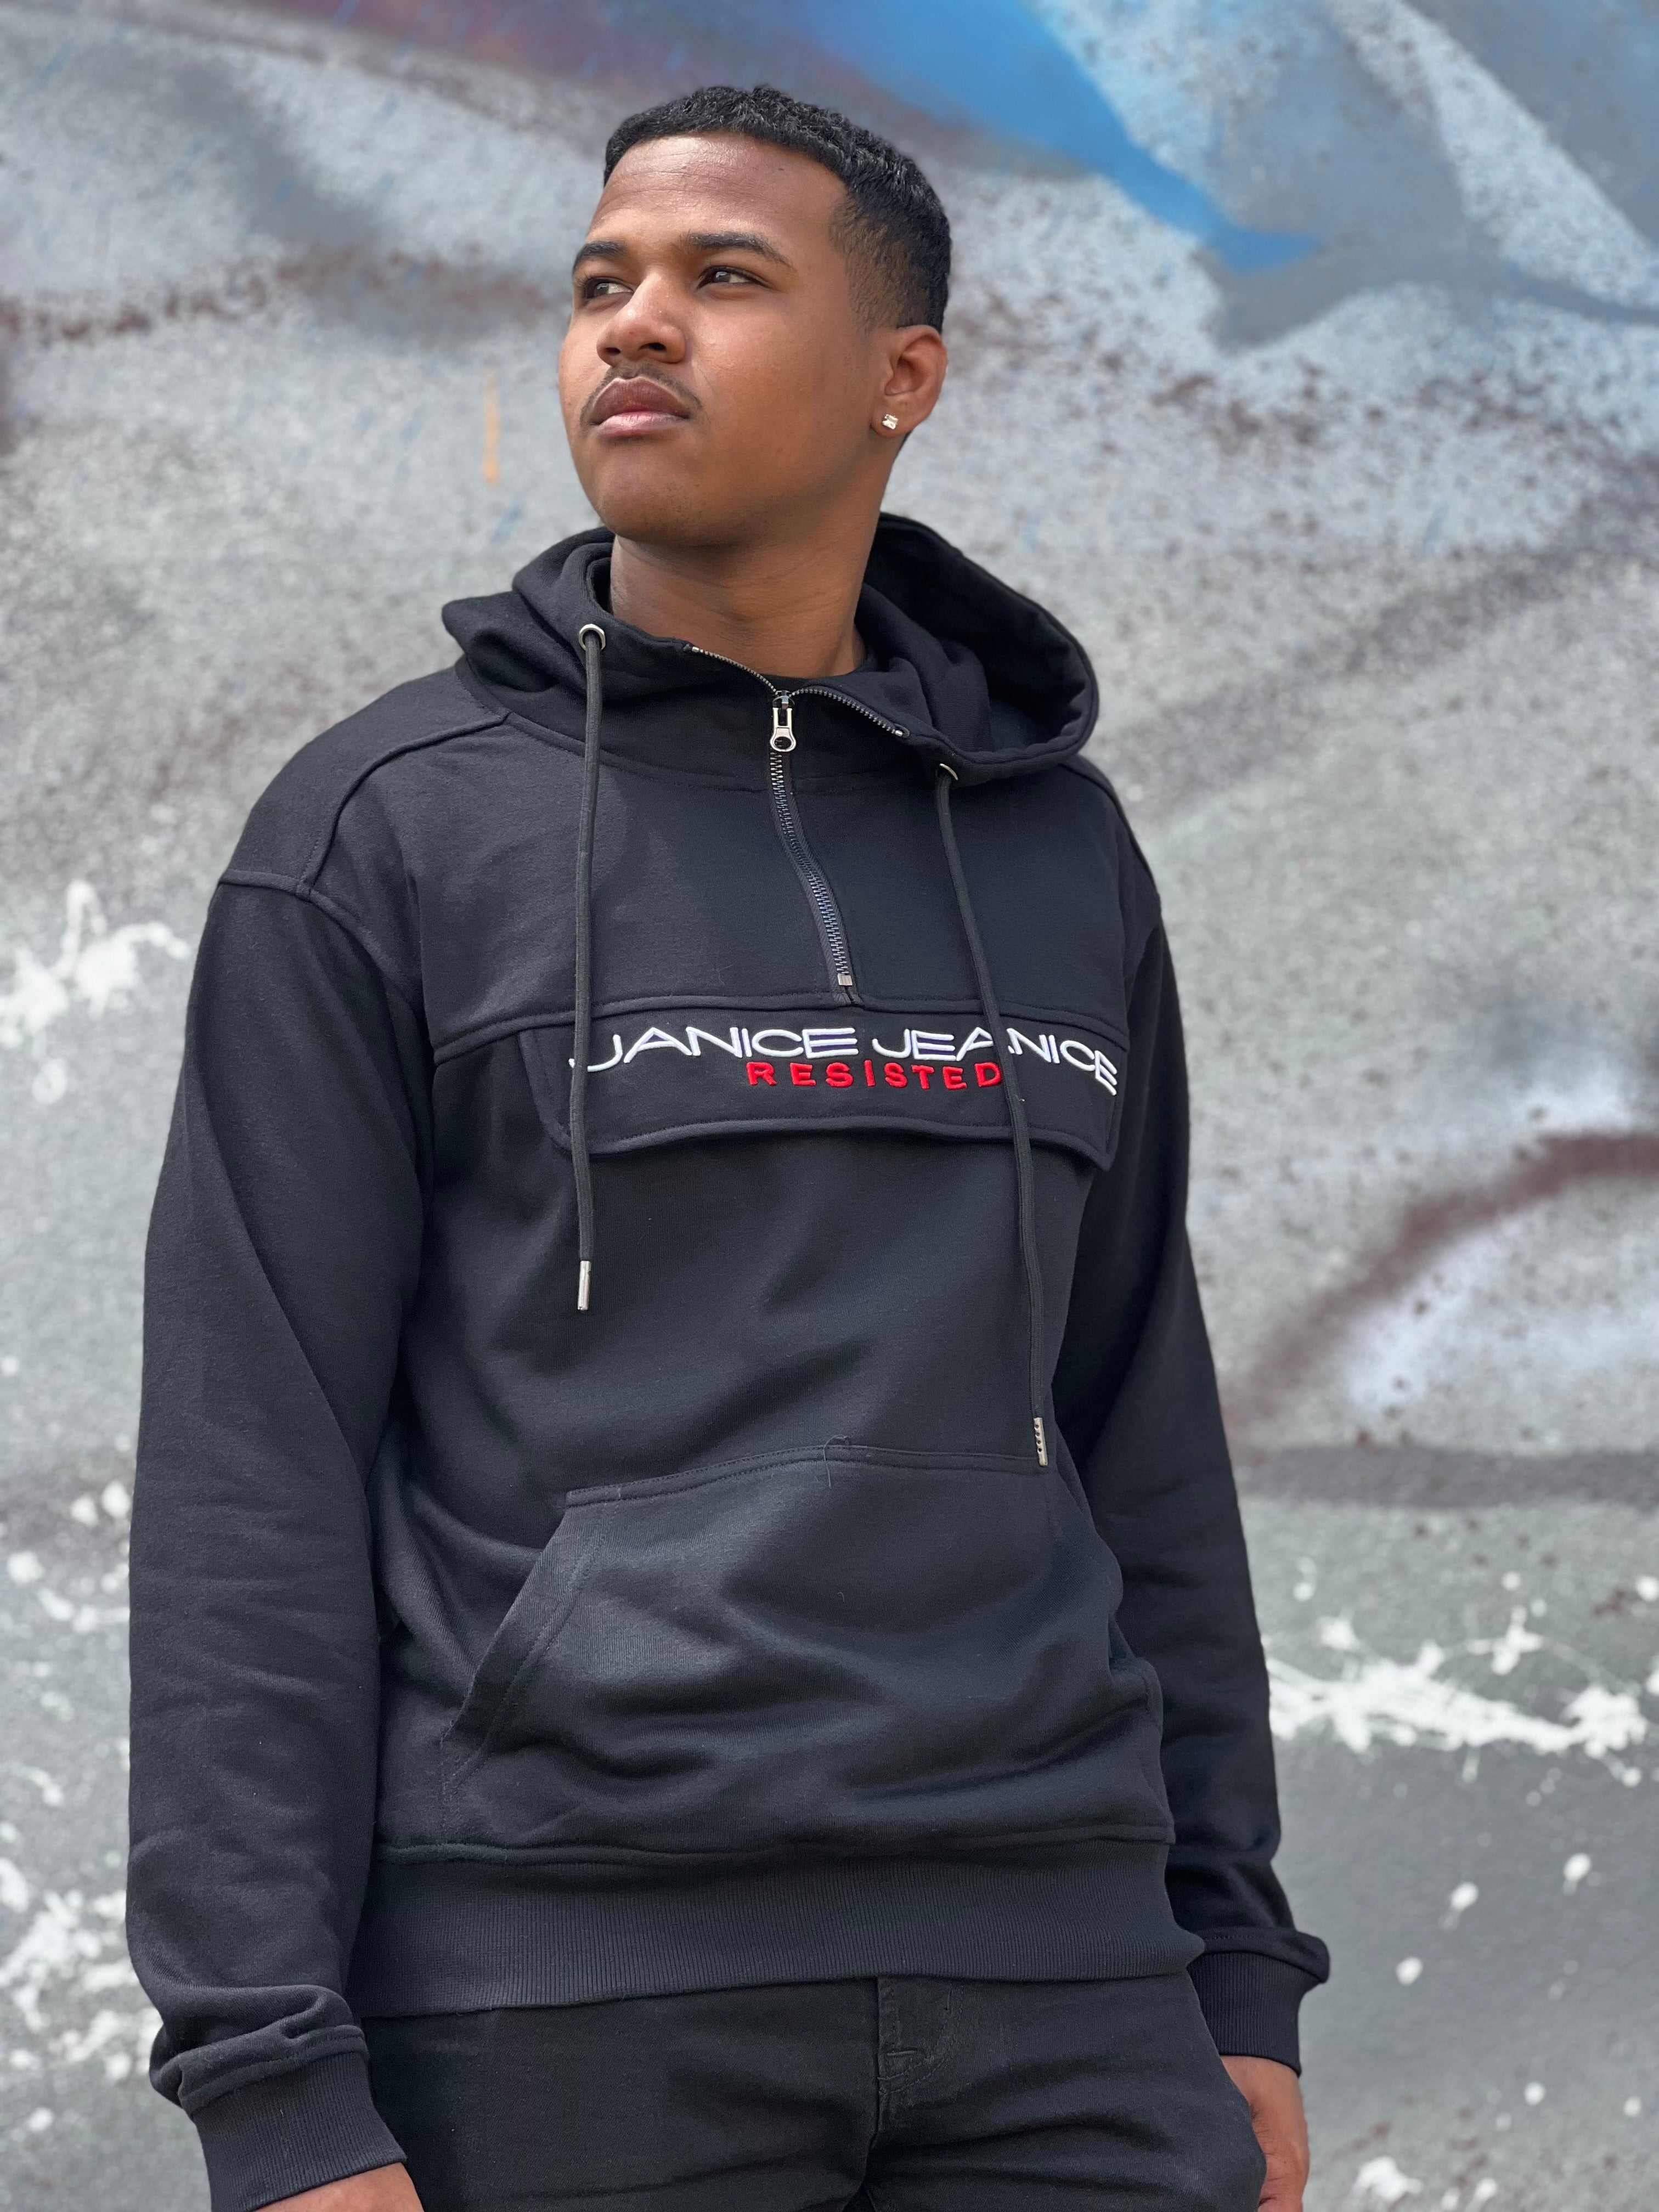 JJR HALF ZIPPED HOODIE - Janice Jeanice Resisted | God Led Passionate Clothing Designs